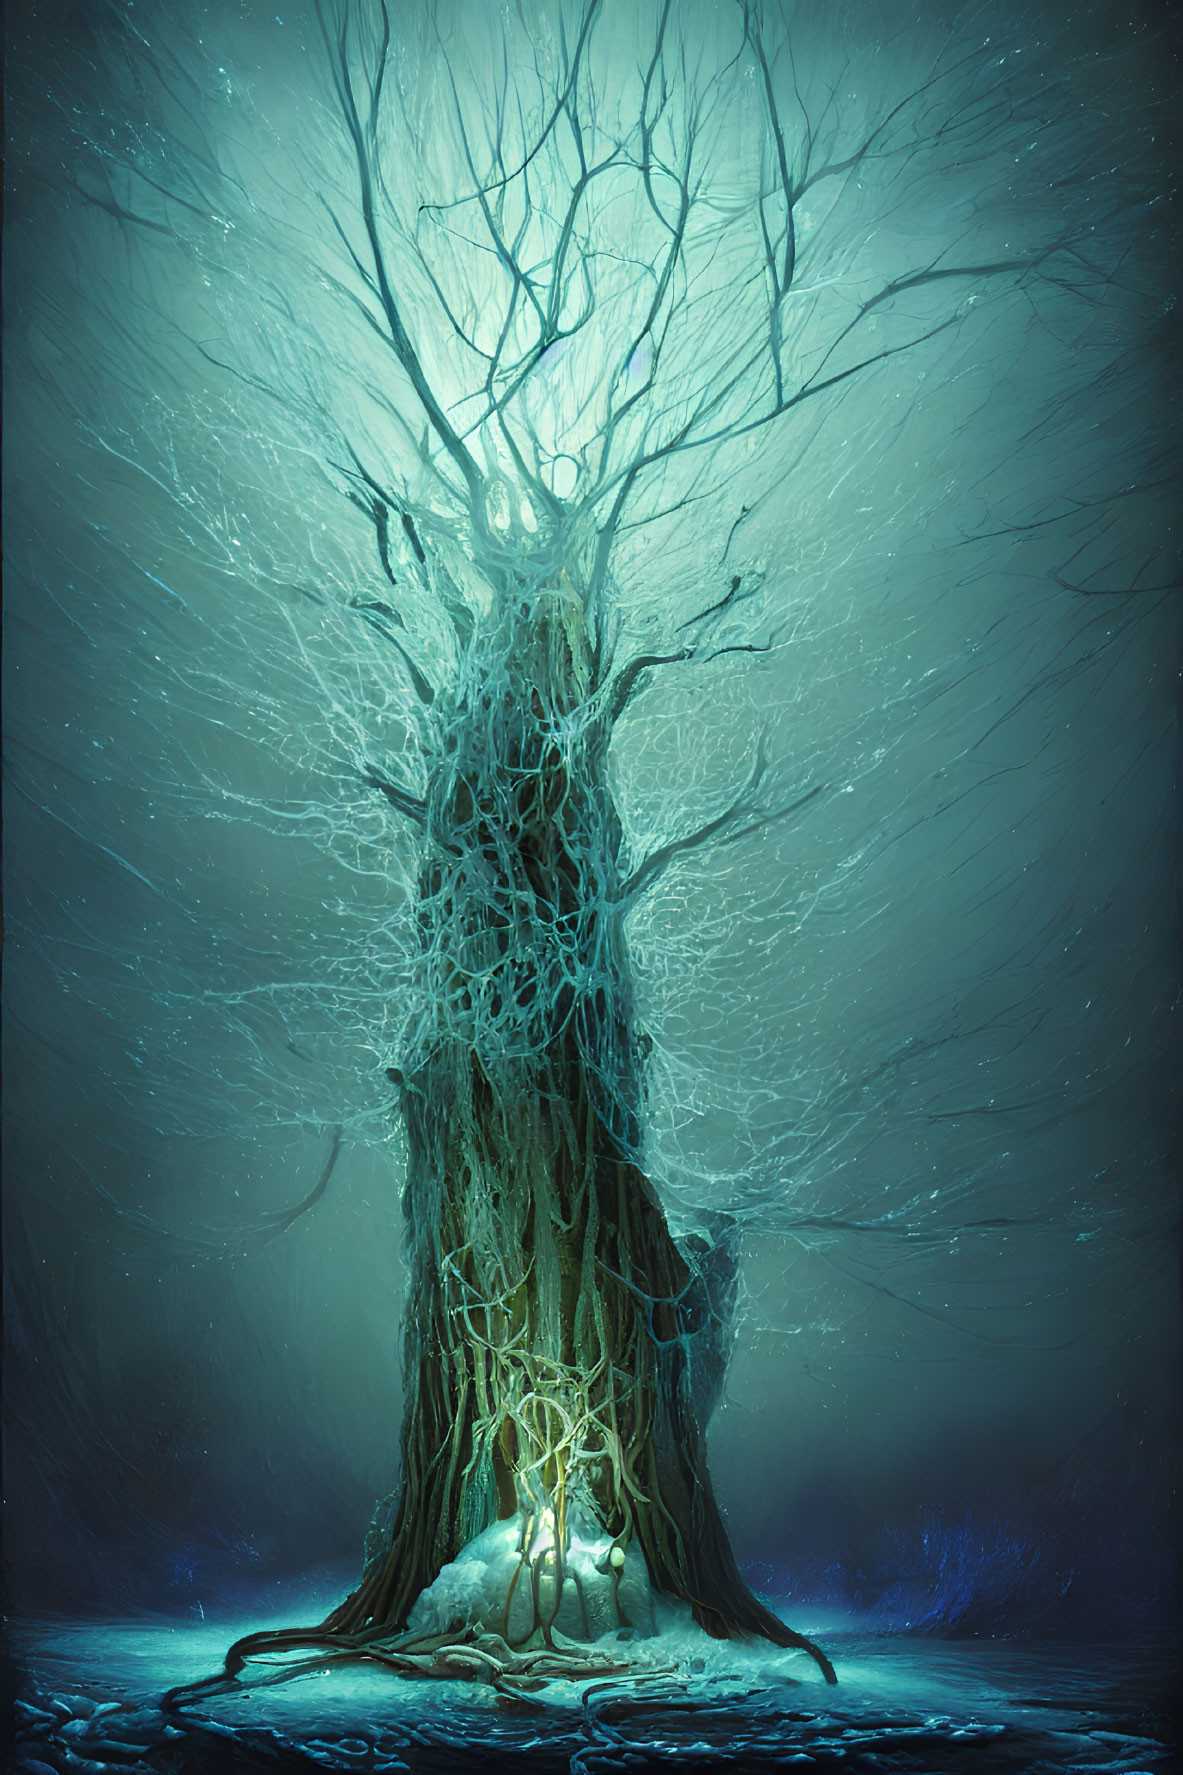 Mystical tree on island with glowing branches and roots in reflective blue setting